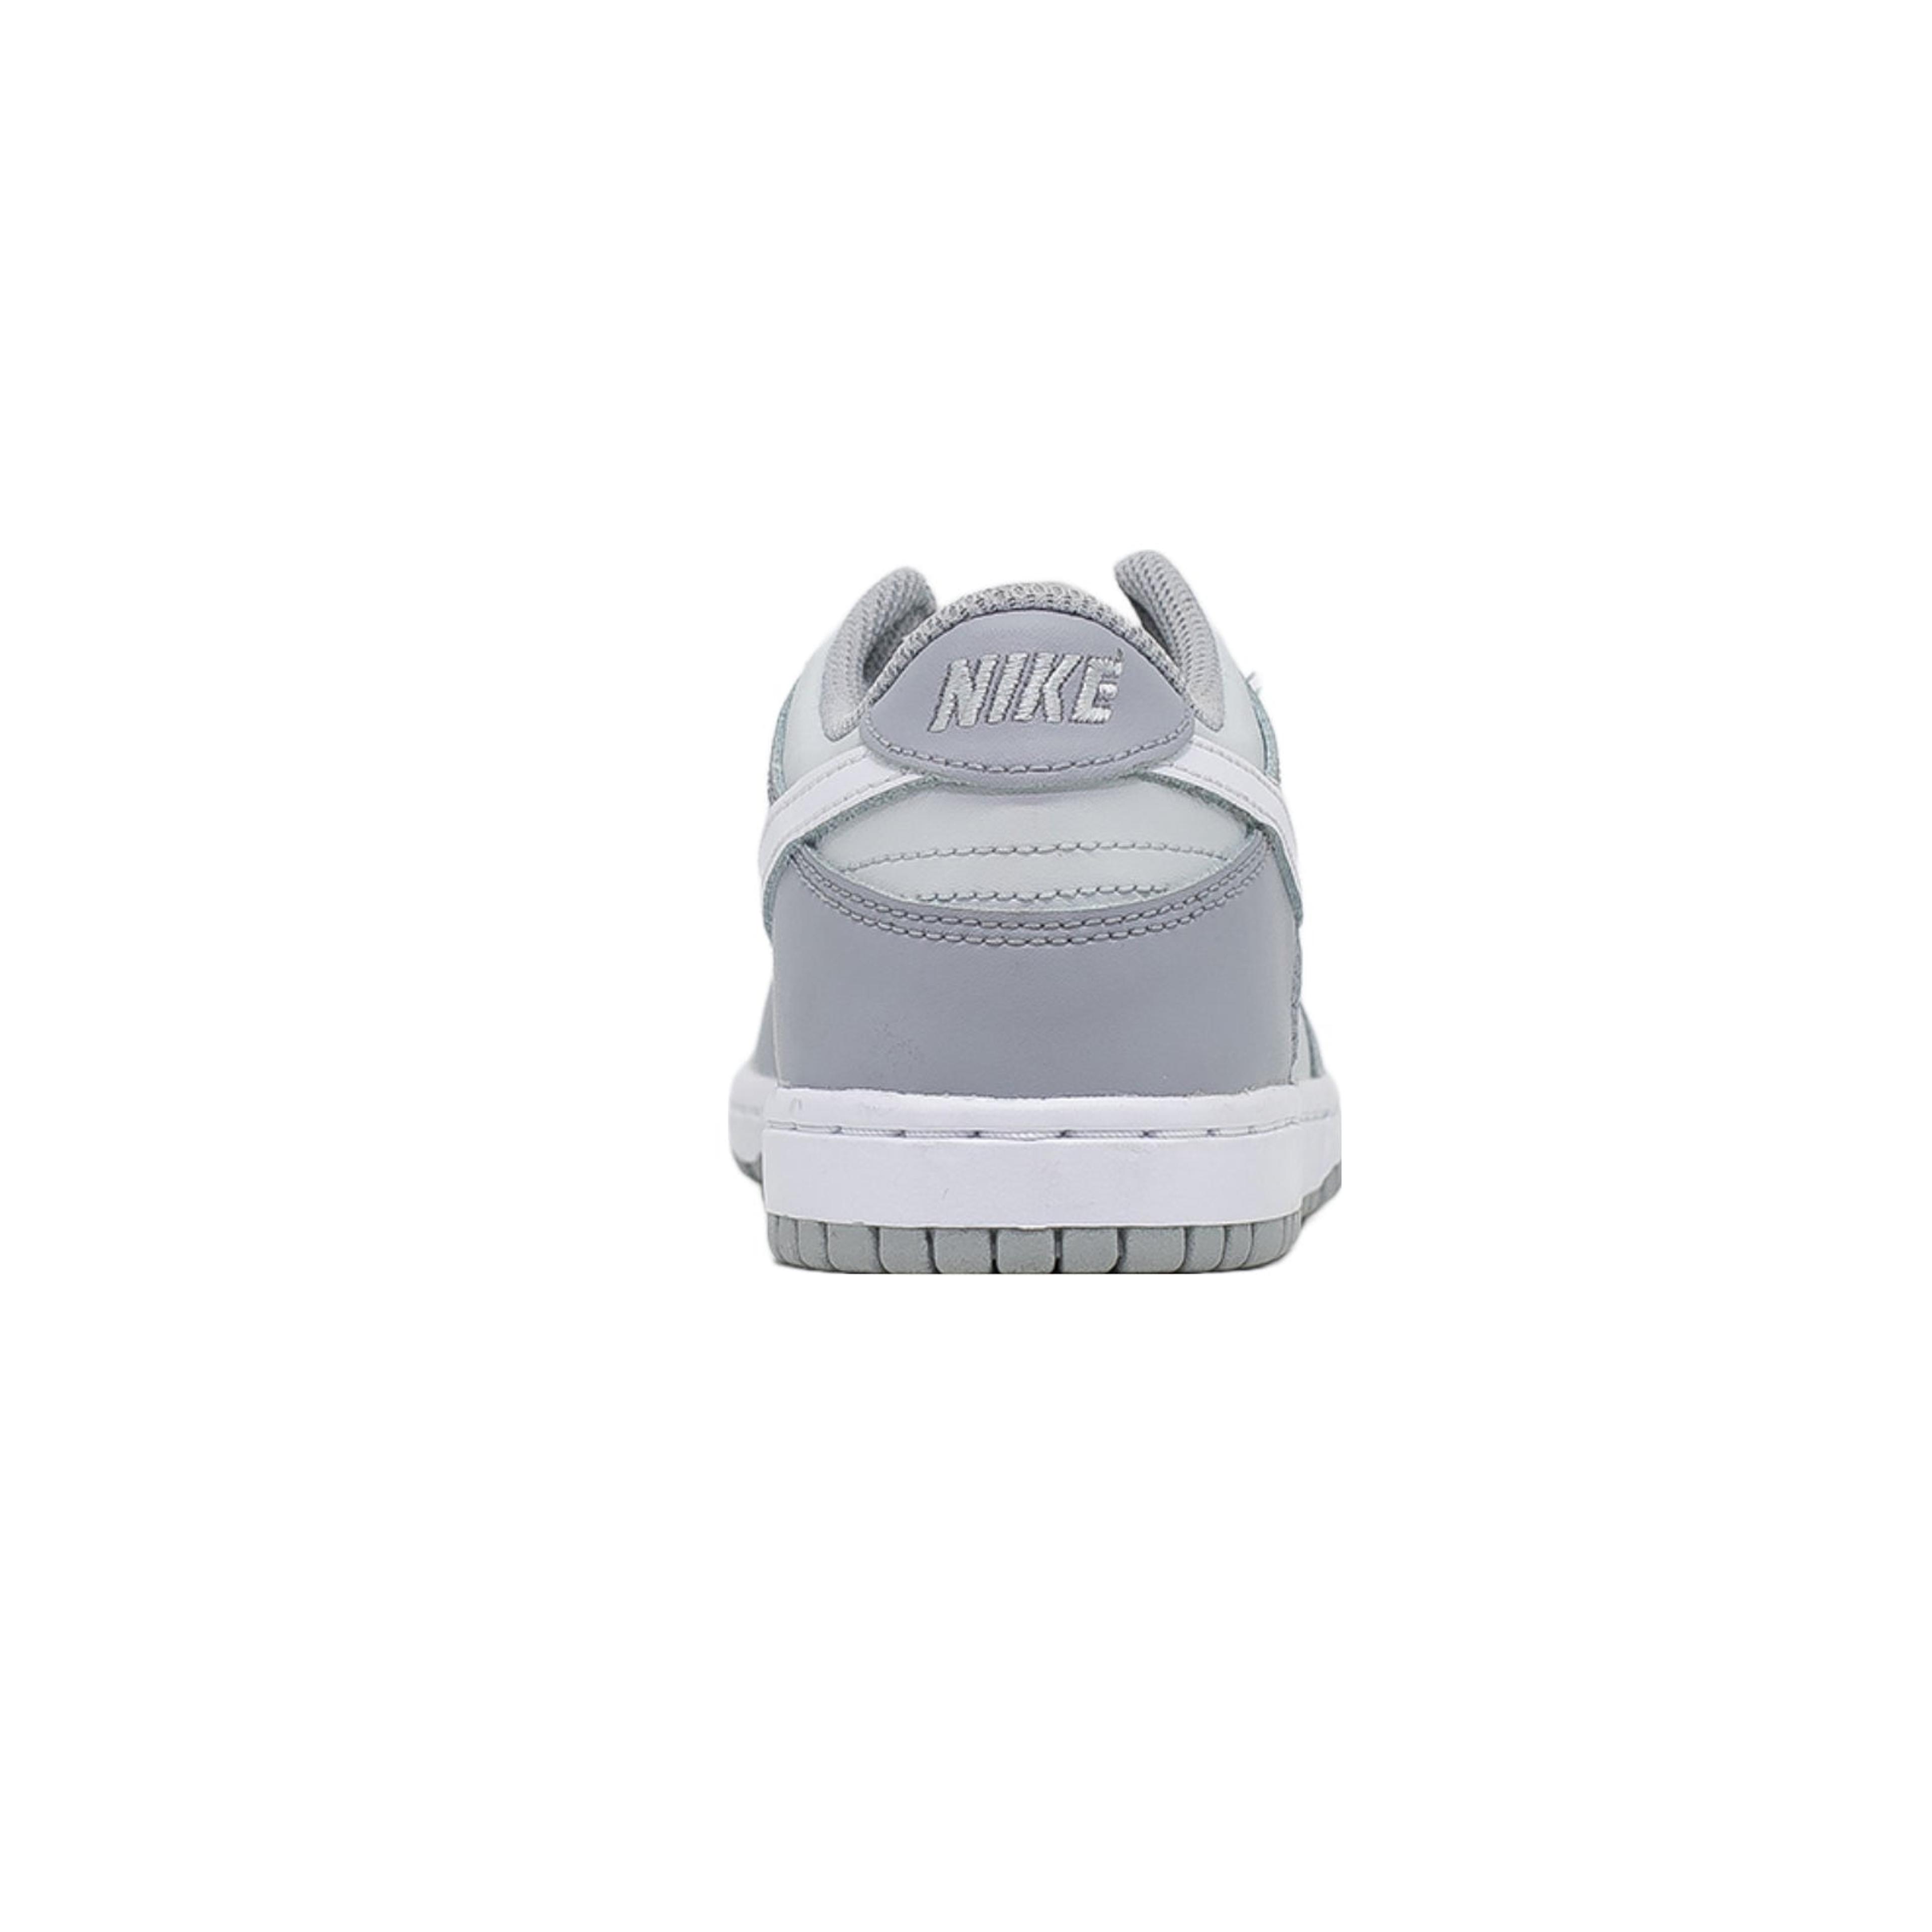 Alternate View 2 of Nike Dunk Low (PS), Wolf Grey